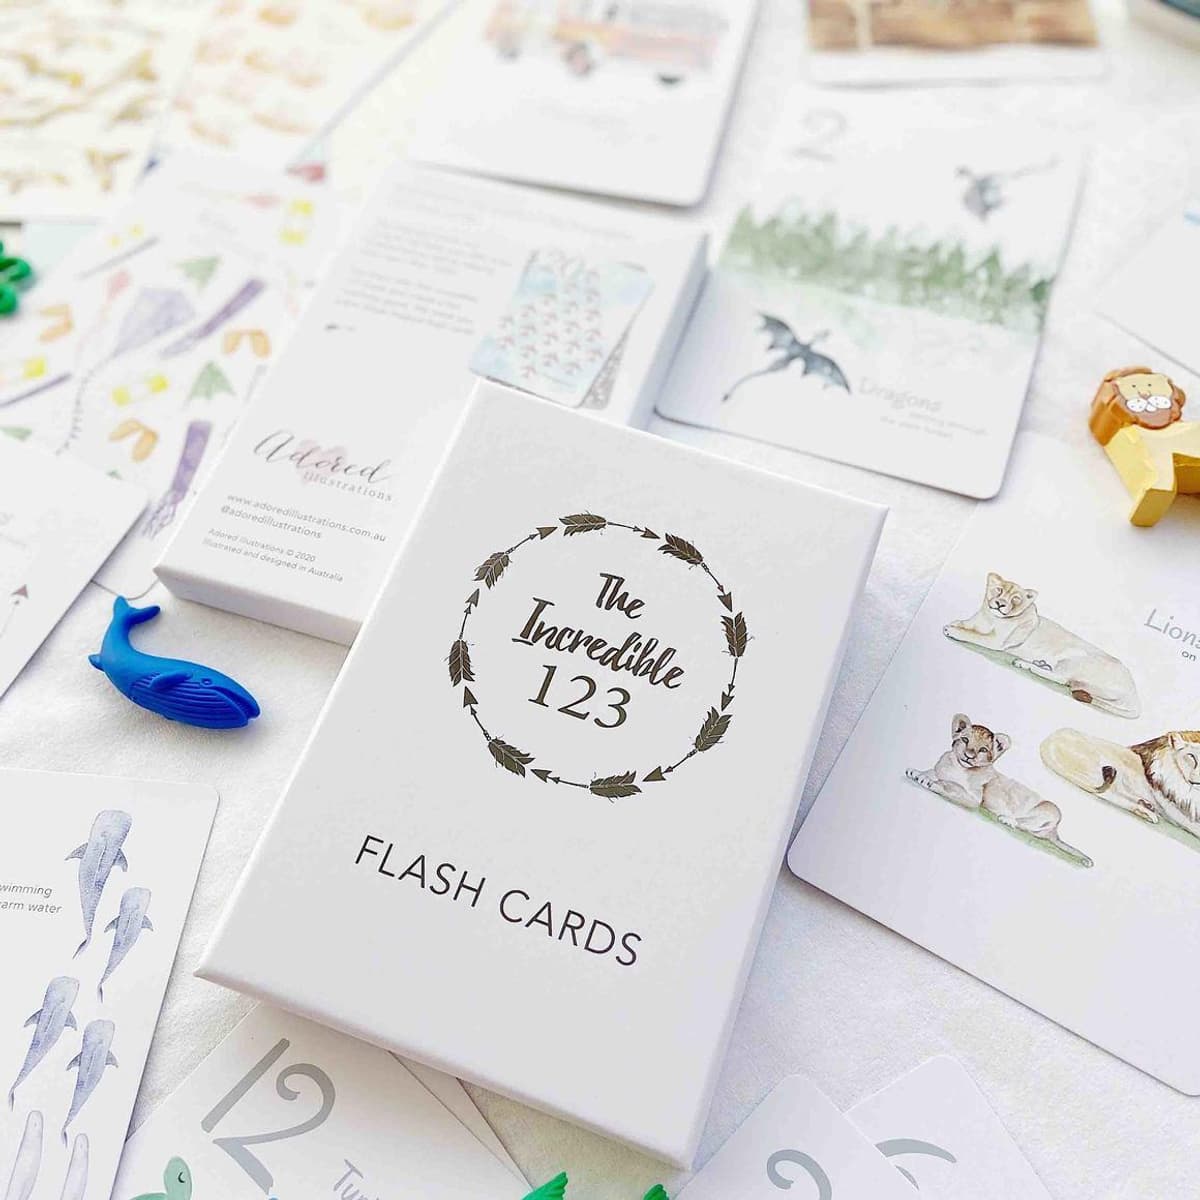 The Incredible 123 Flashcards